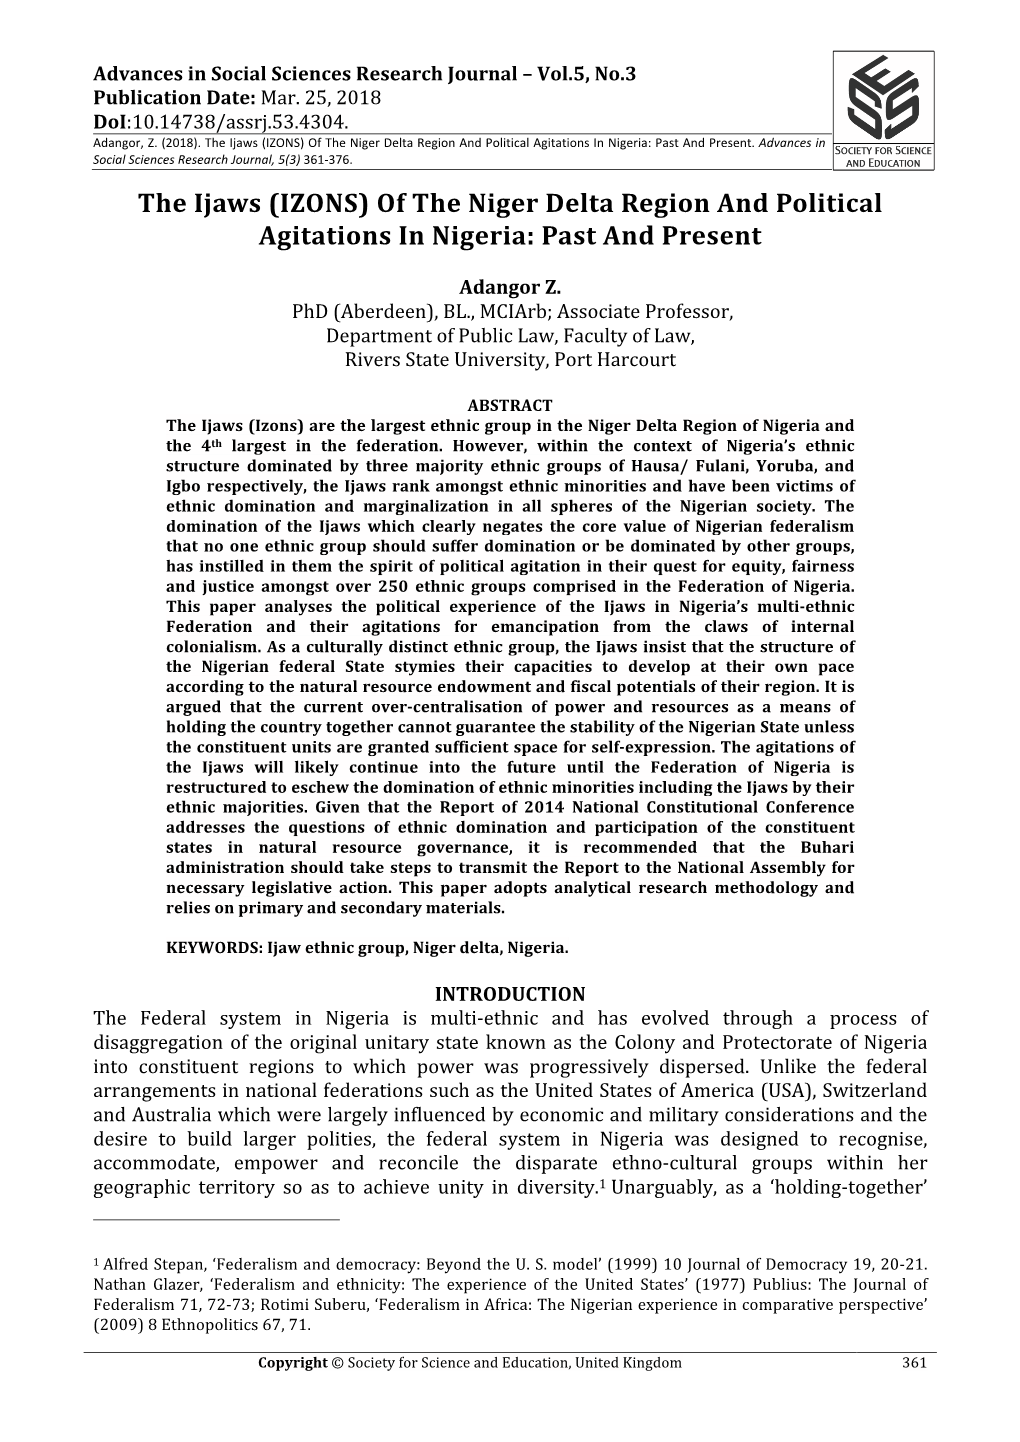 The Ijaws (IZONS) of the Niger Delta Region and Political Agitations in Nigeria: Past and Present